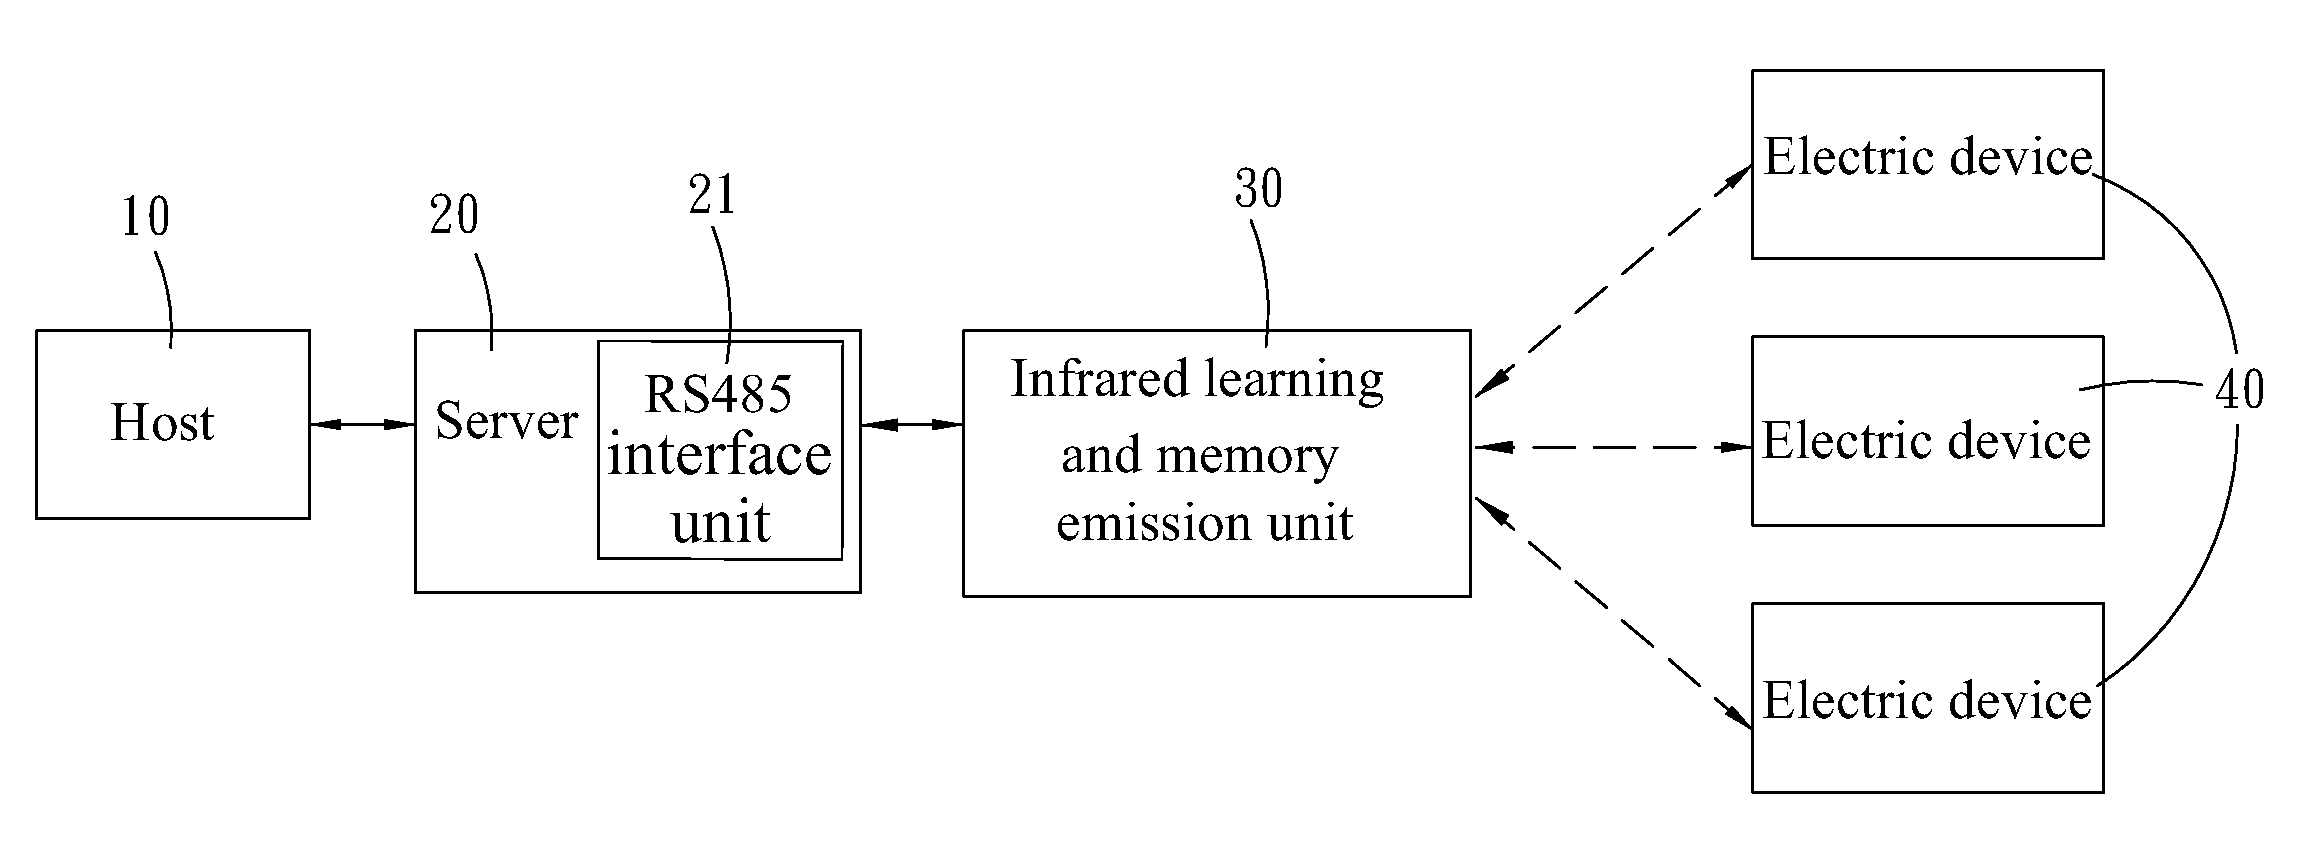 Infrared apparatus transmitting through a wireless communication protocol interface of a network addressed server